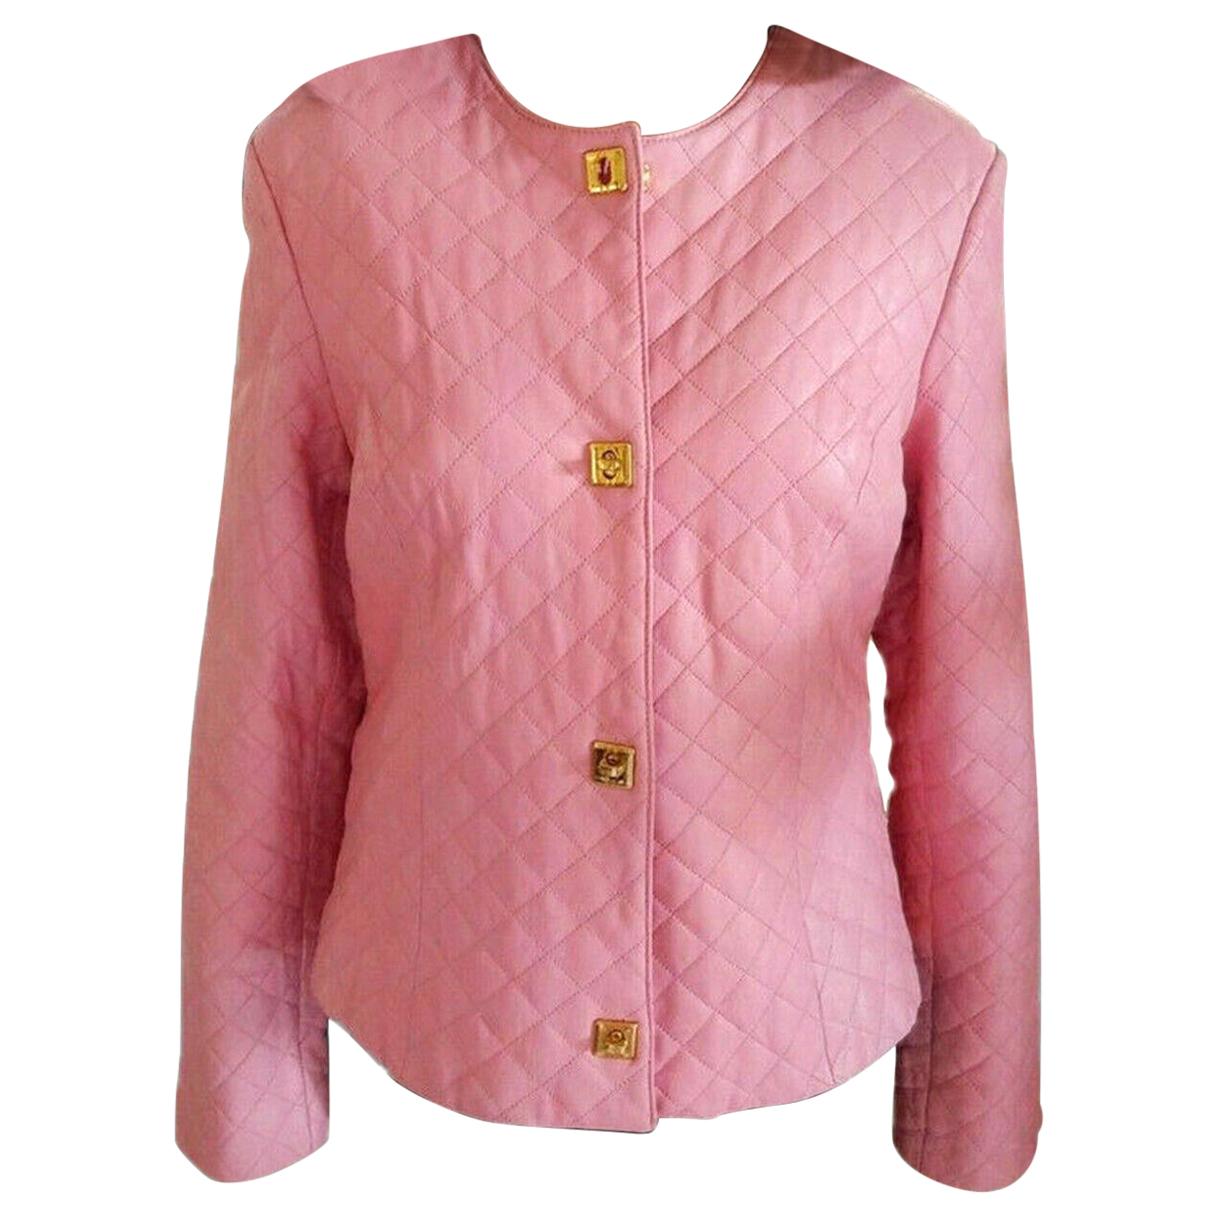  Gianfranco Ferre Petal Pink Quilted Lambskin Leather Jacket EU 38/ US 4 6 For Sale